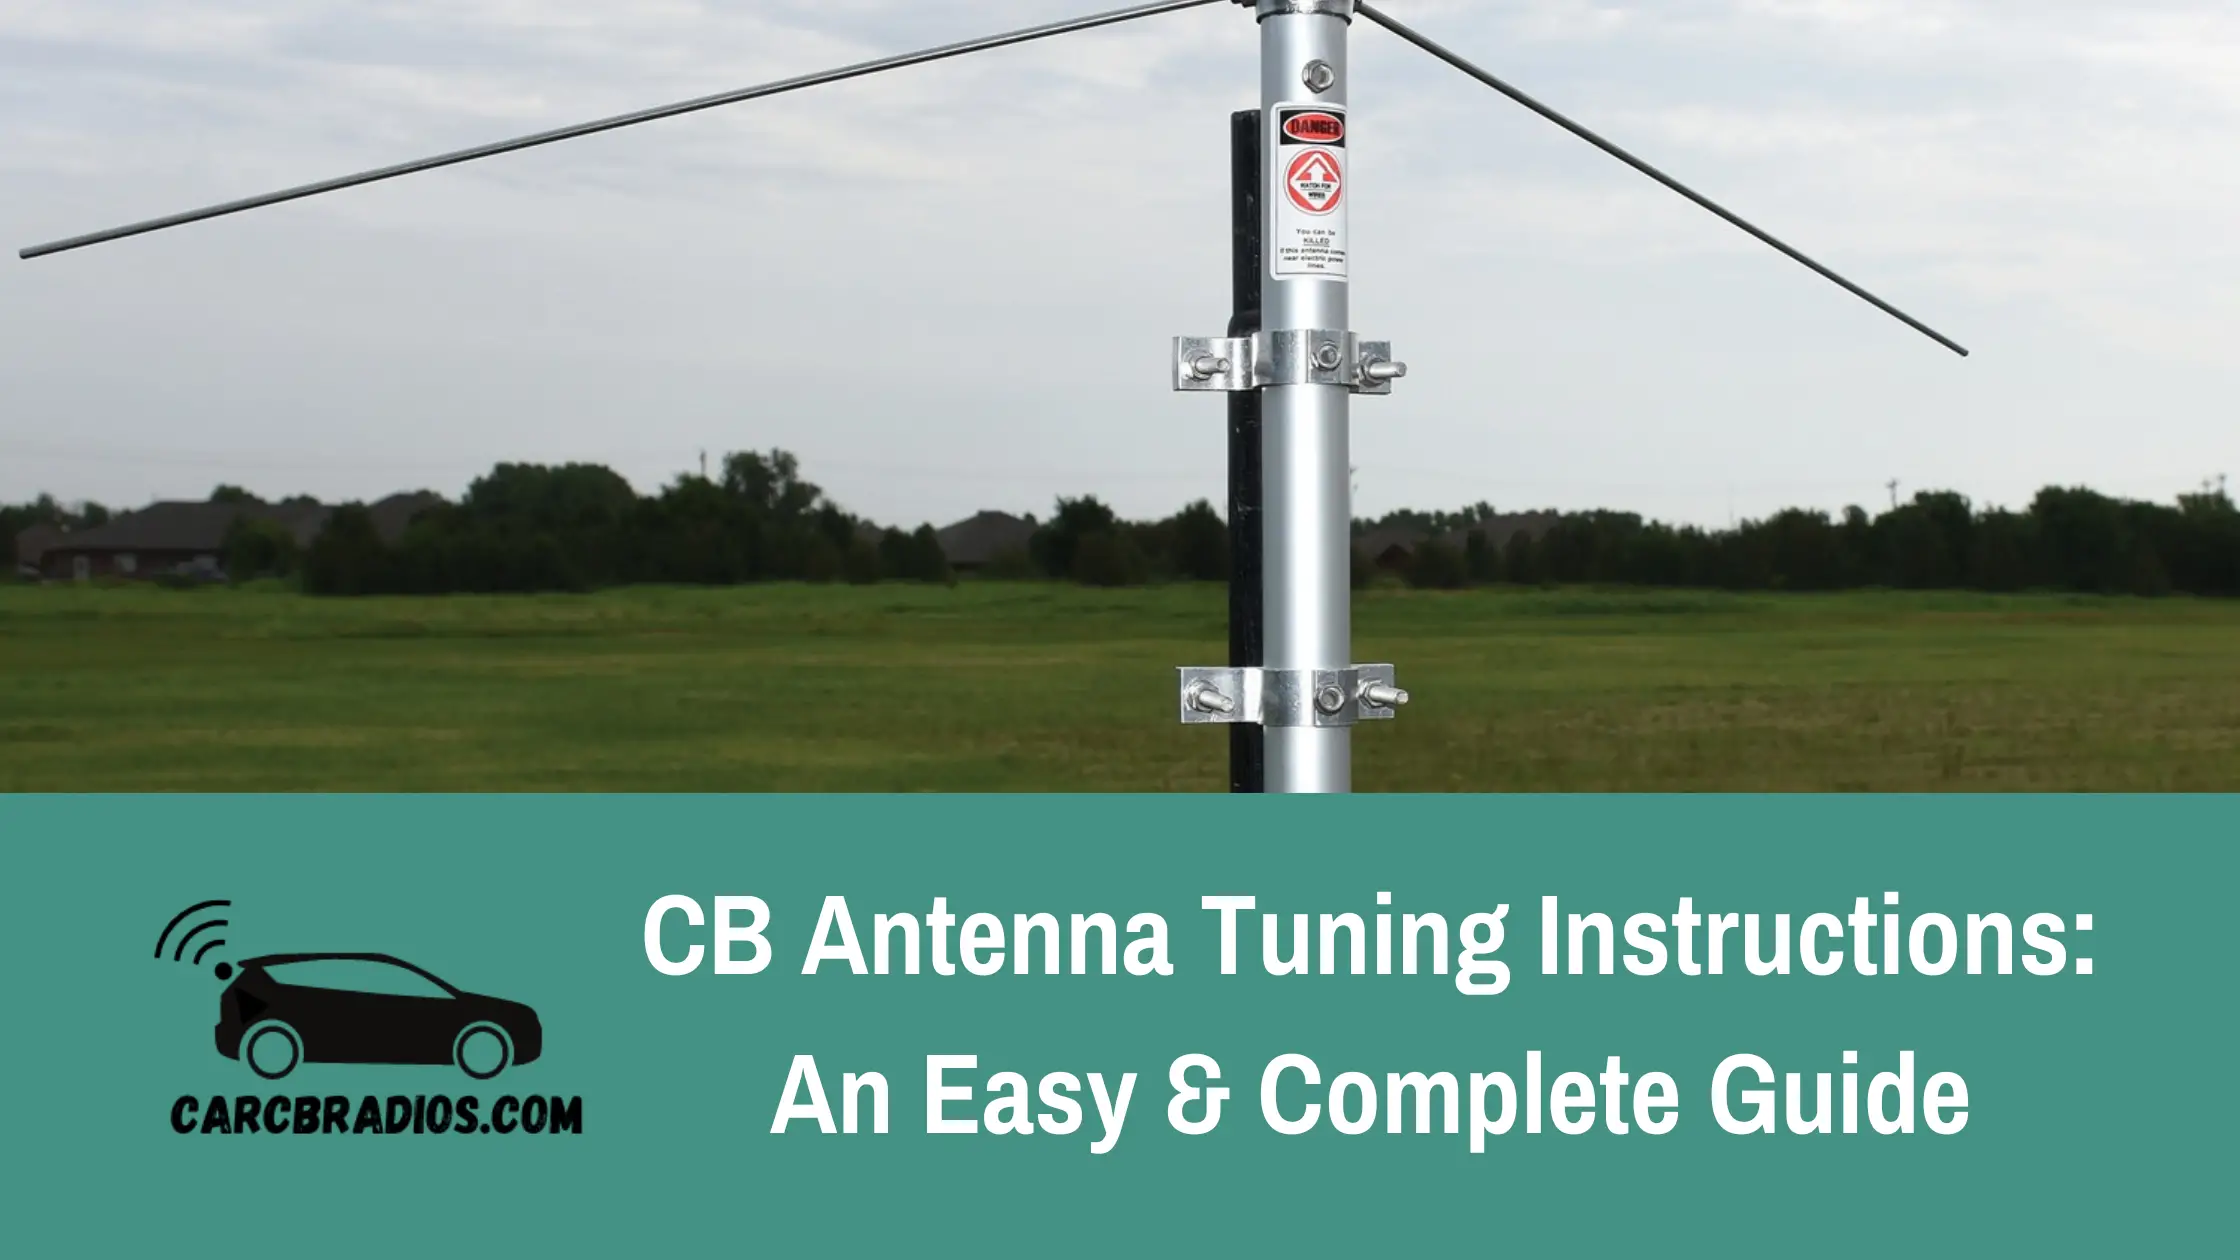 Understanding No Ground Plane (NGP) Antennas is crucial before deciding to invest in one. These antennas are designed to work without a ground plane, which is typically provided by the metal body of a vehicle. Instead, they use a coil and capacitors to create a ground plane effect. This makes them ideal for use on fiberglass, RVs, boats, and other non-metallic surfaces.